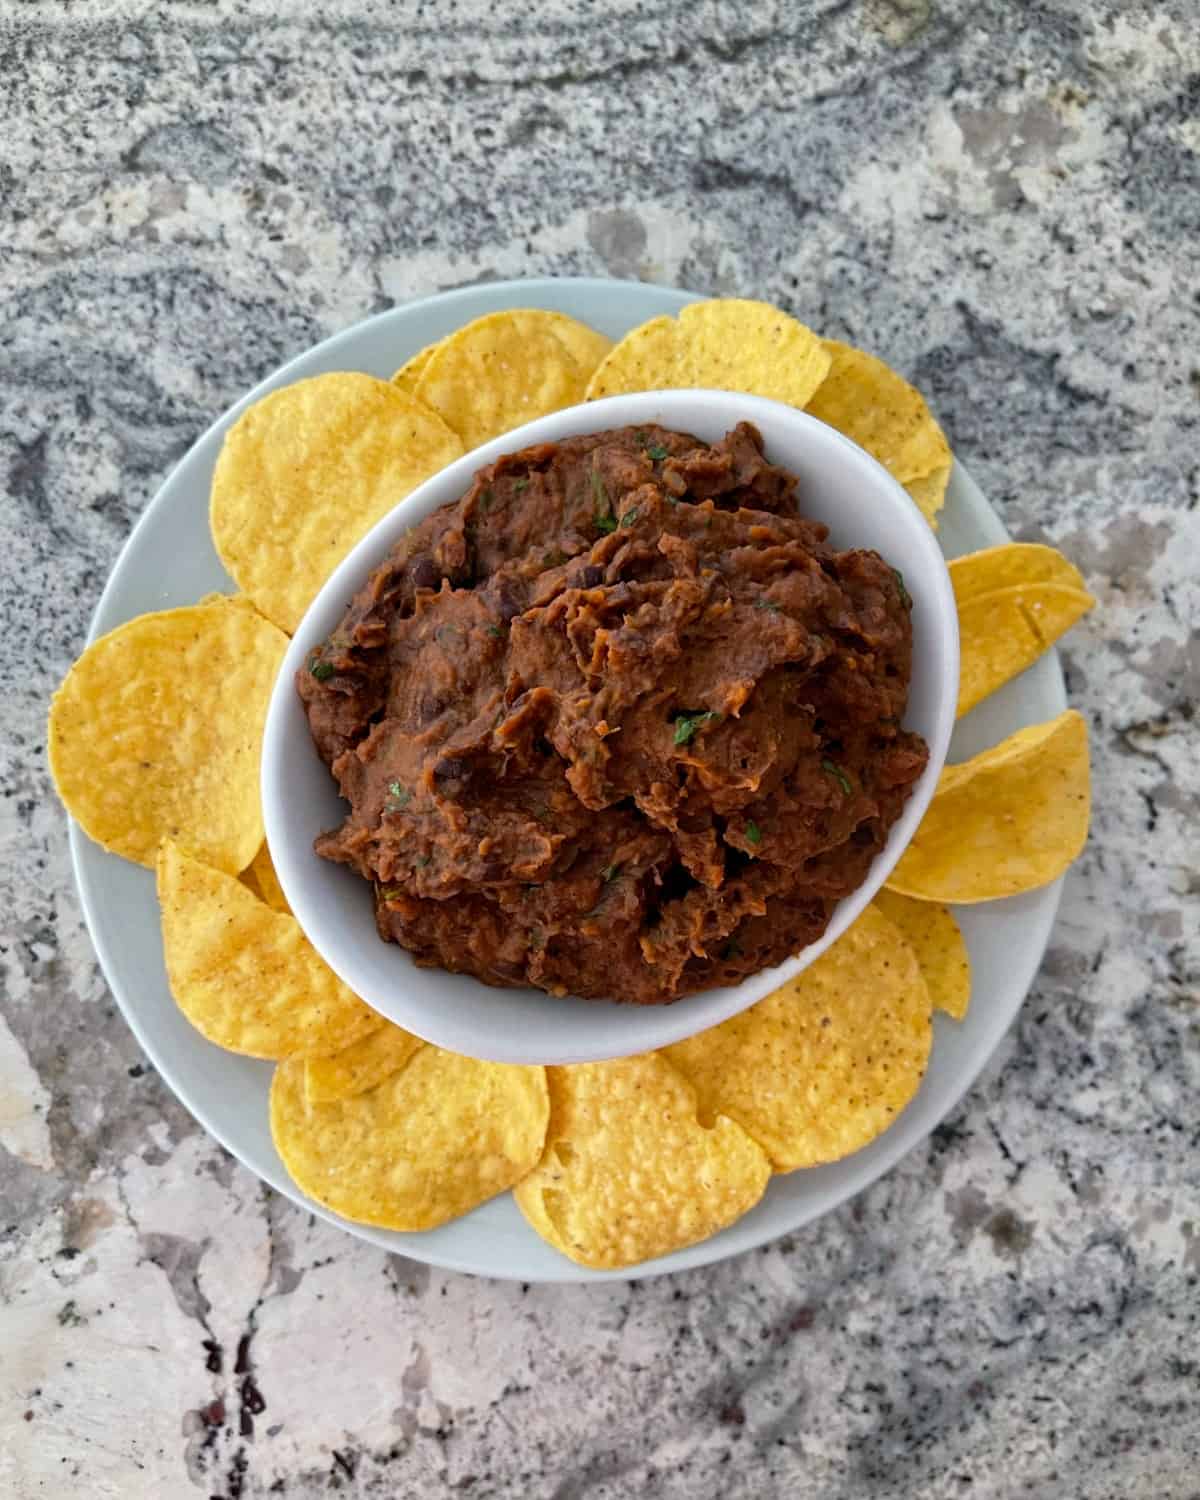 Refried black bean dip in white bowl with plate of yellow corn tortilla chips.